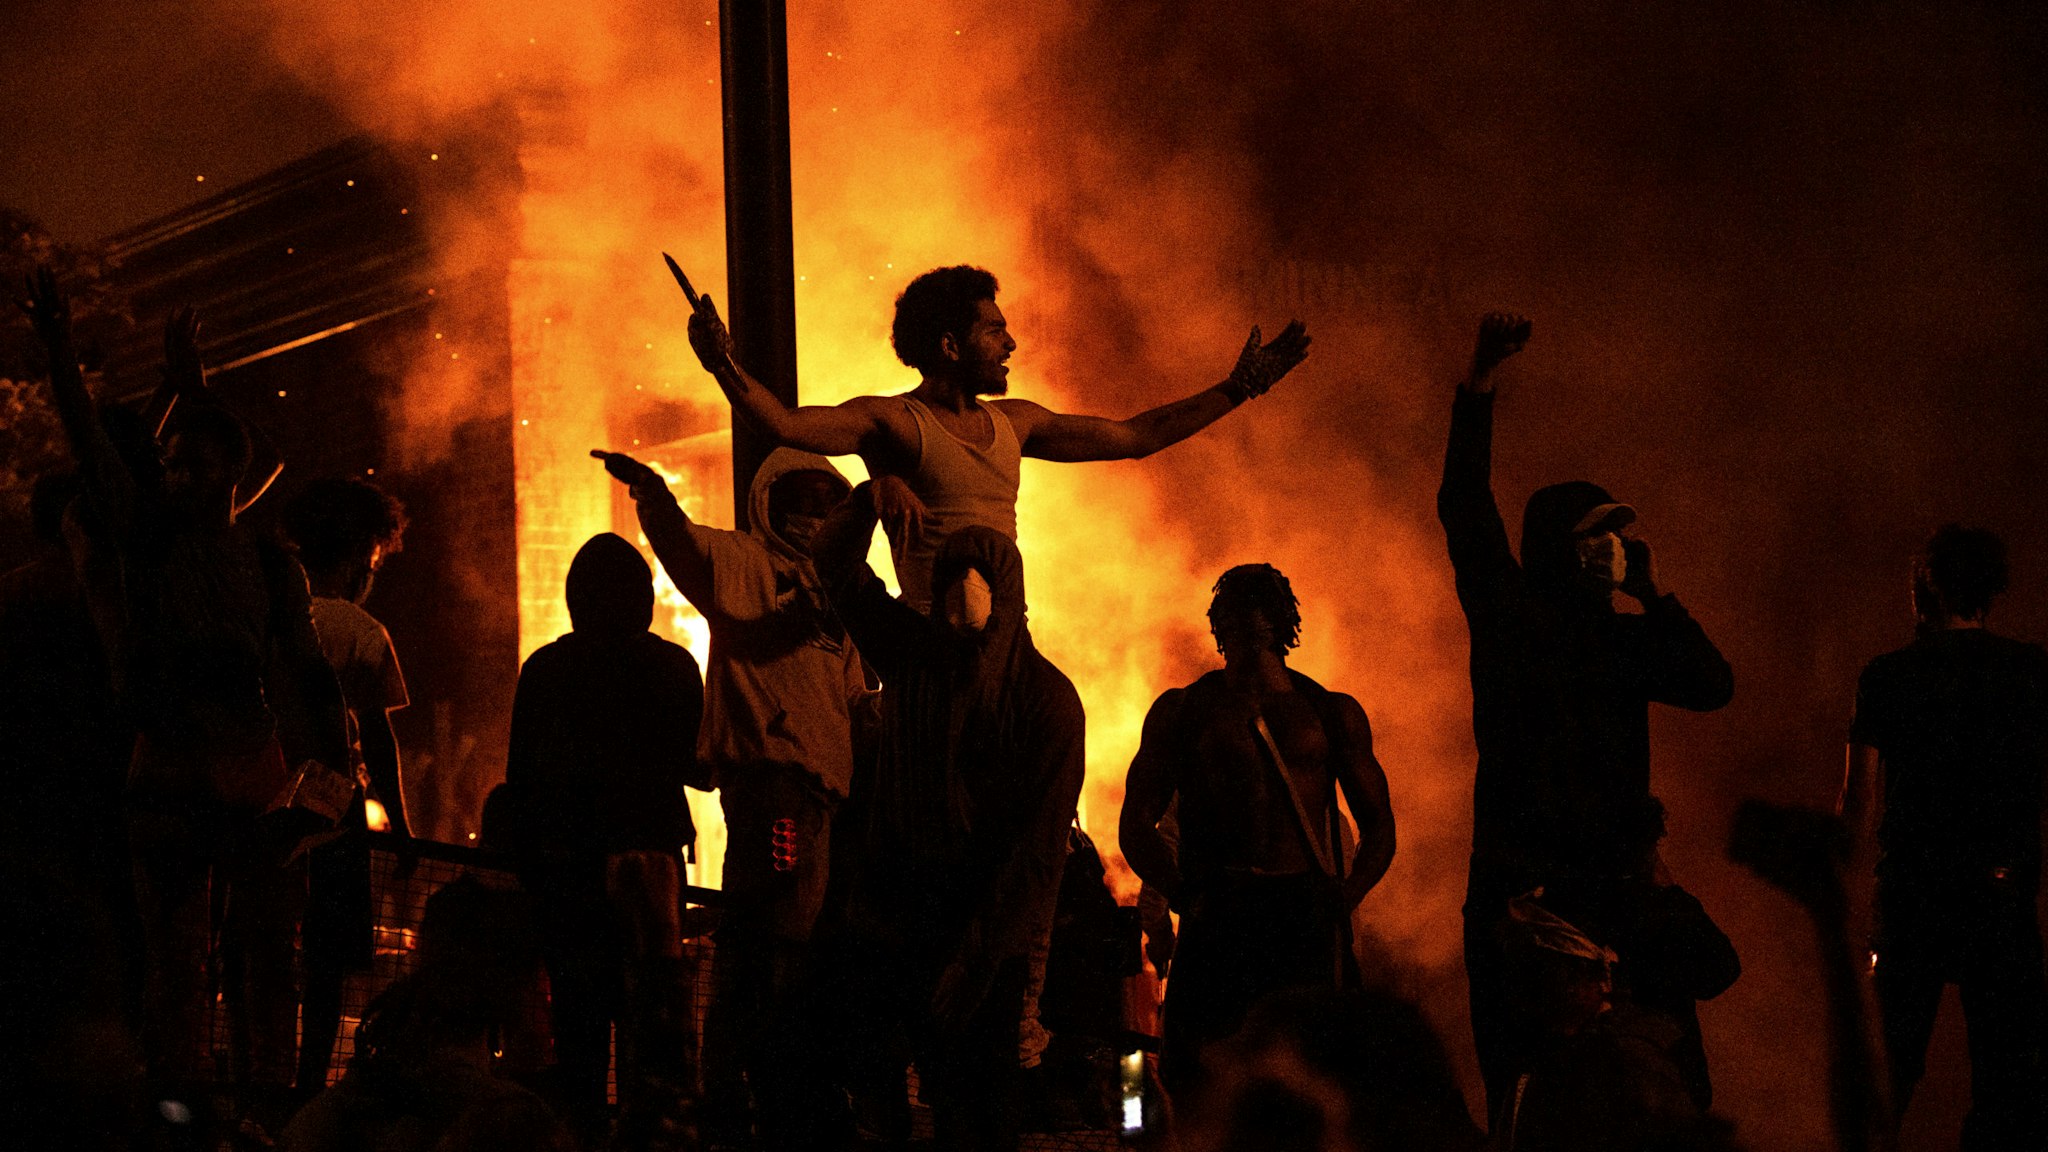 MINNEAPOLIS, MN - MAY 28: Protesters cheer as the Third Police Precinct burns behind them on May 28, 2020 in Minneapolis, Minnesota. As unrest continues after the death of George Floyd police abandoned the precinct building, allowing protesters to set fire to it.